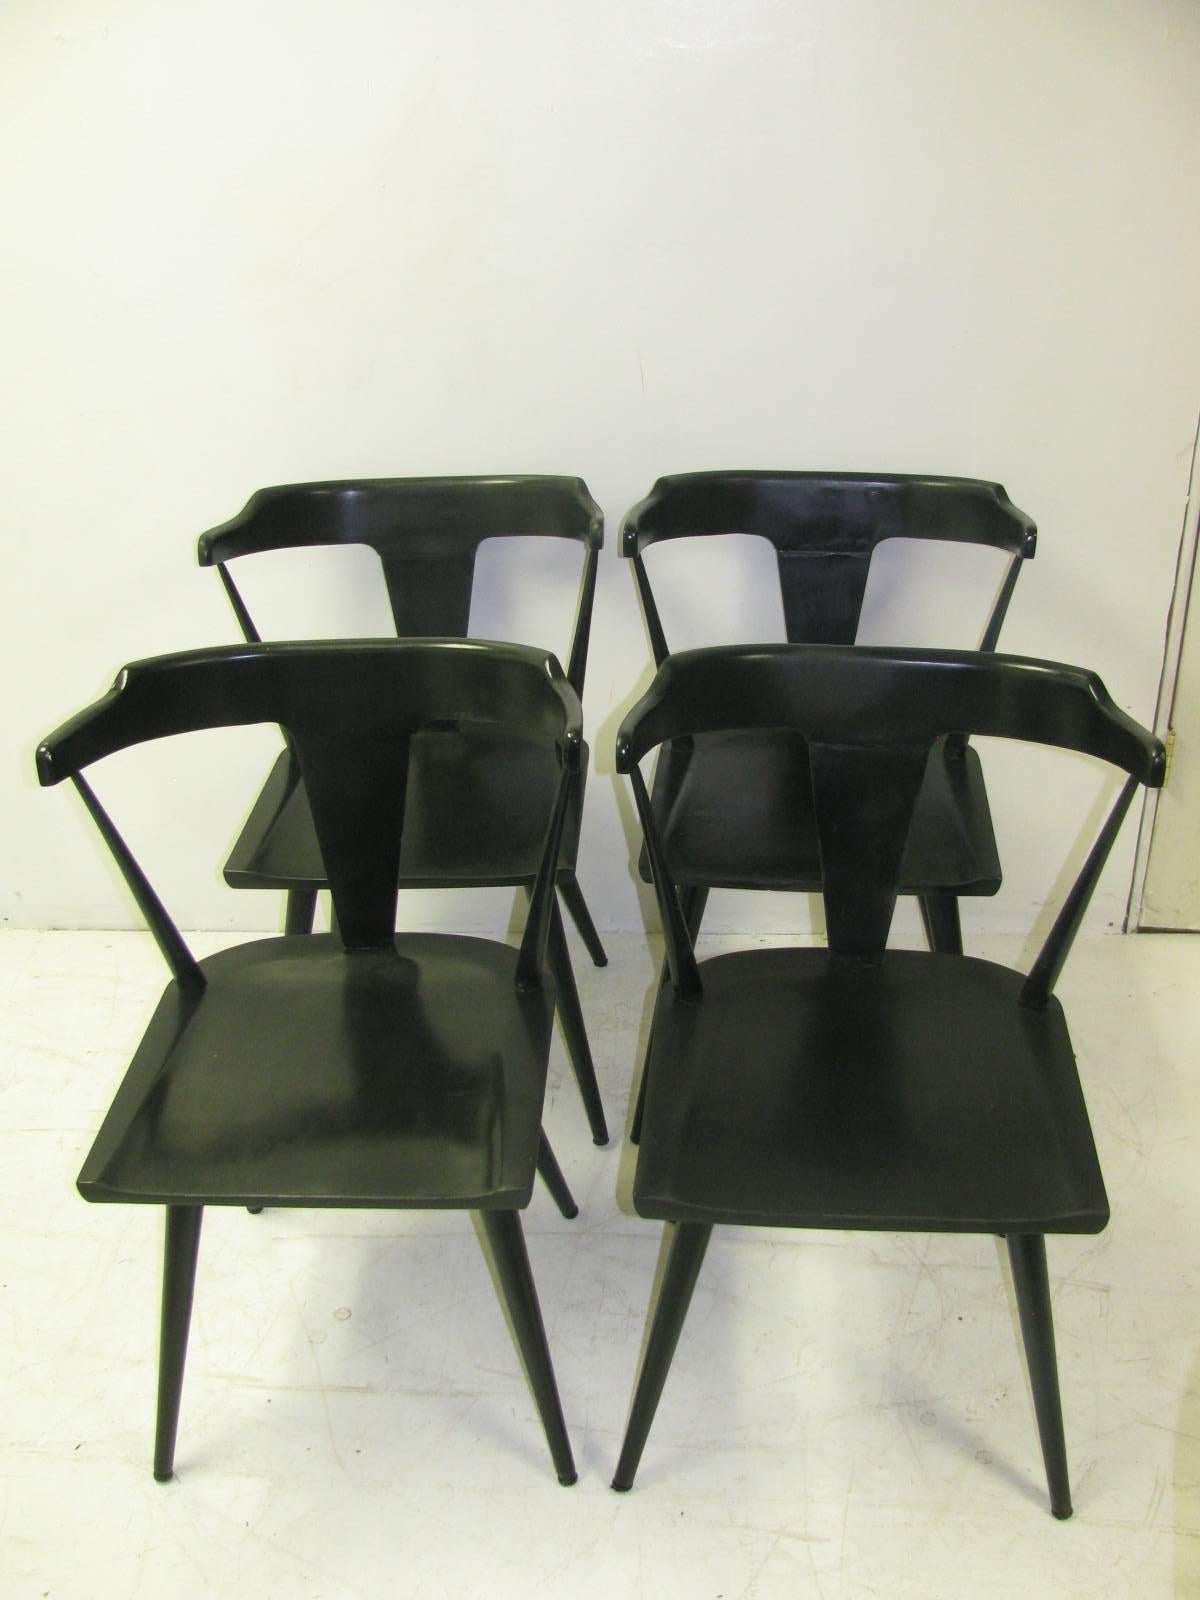 Set of four dining room chairs in black enamel by Paul McCobb for Winchendon. Chairs are labeled underneath the seat. In very good ,tight condition and have been recently recoated.